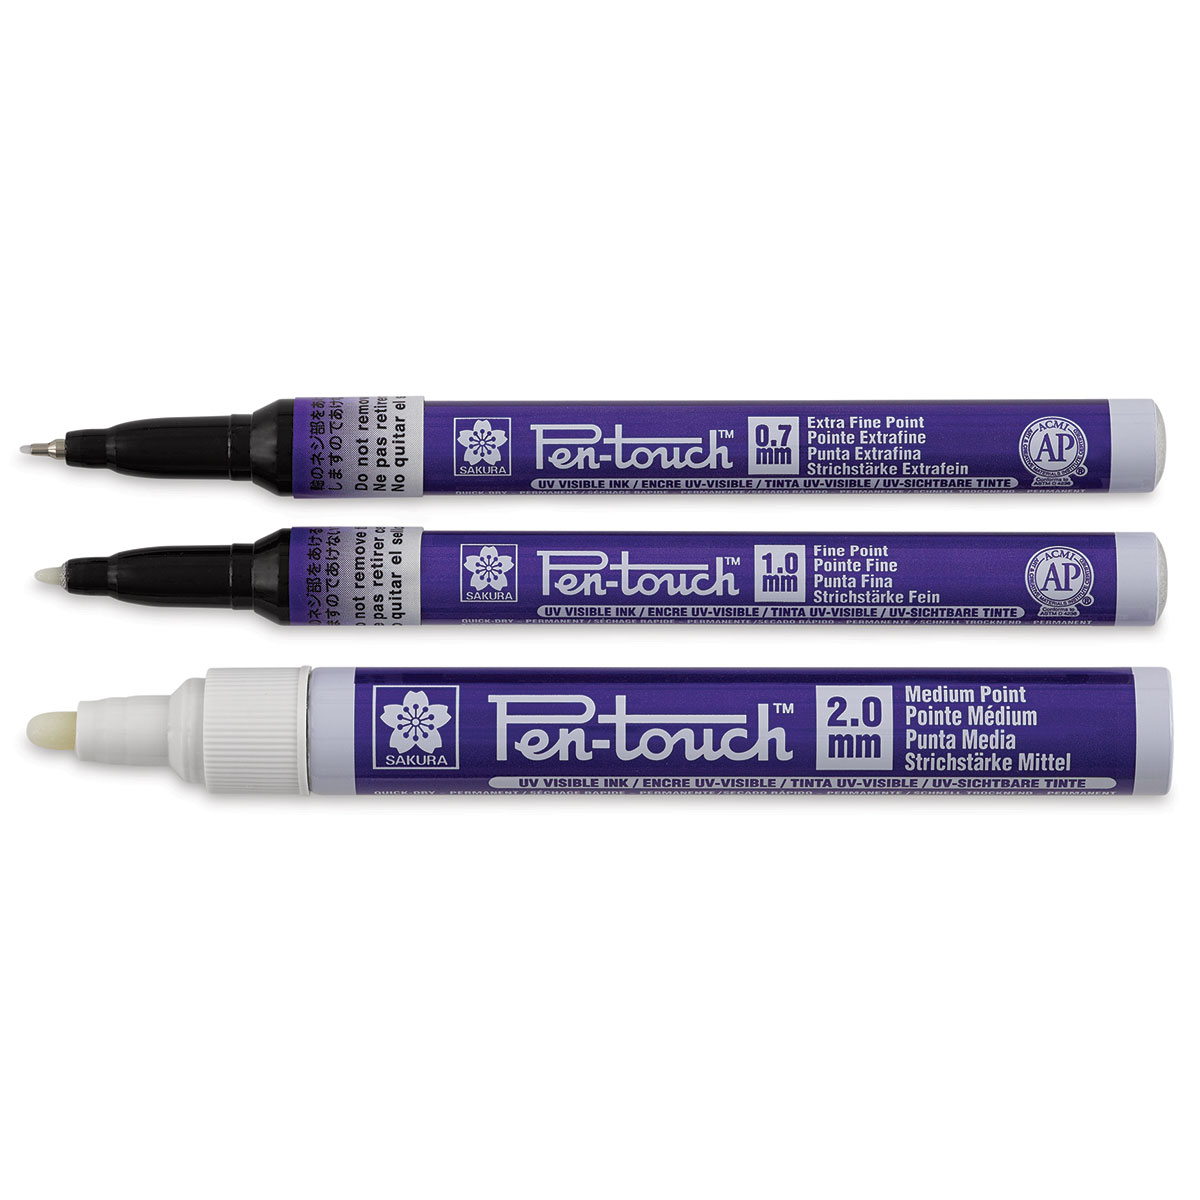 Sakura Pen-Touch Paint Markers and Sets | Art Materials